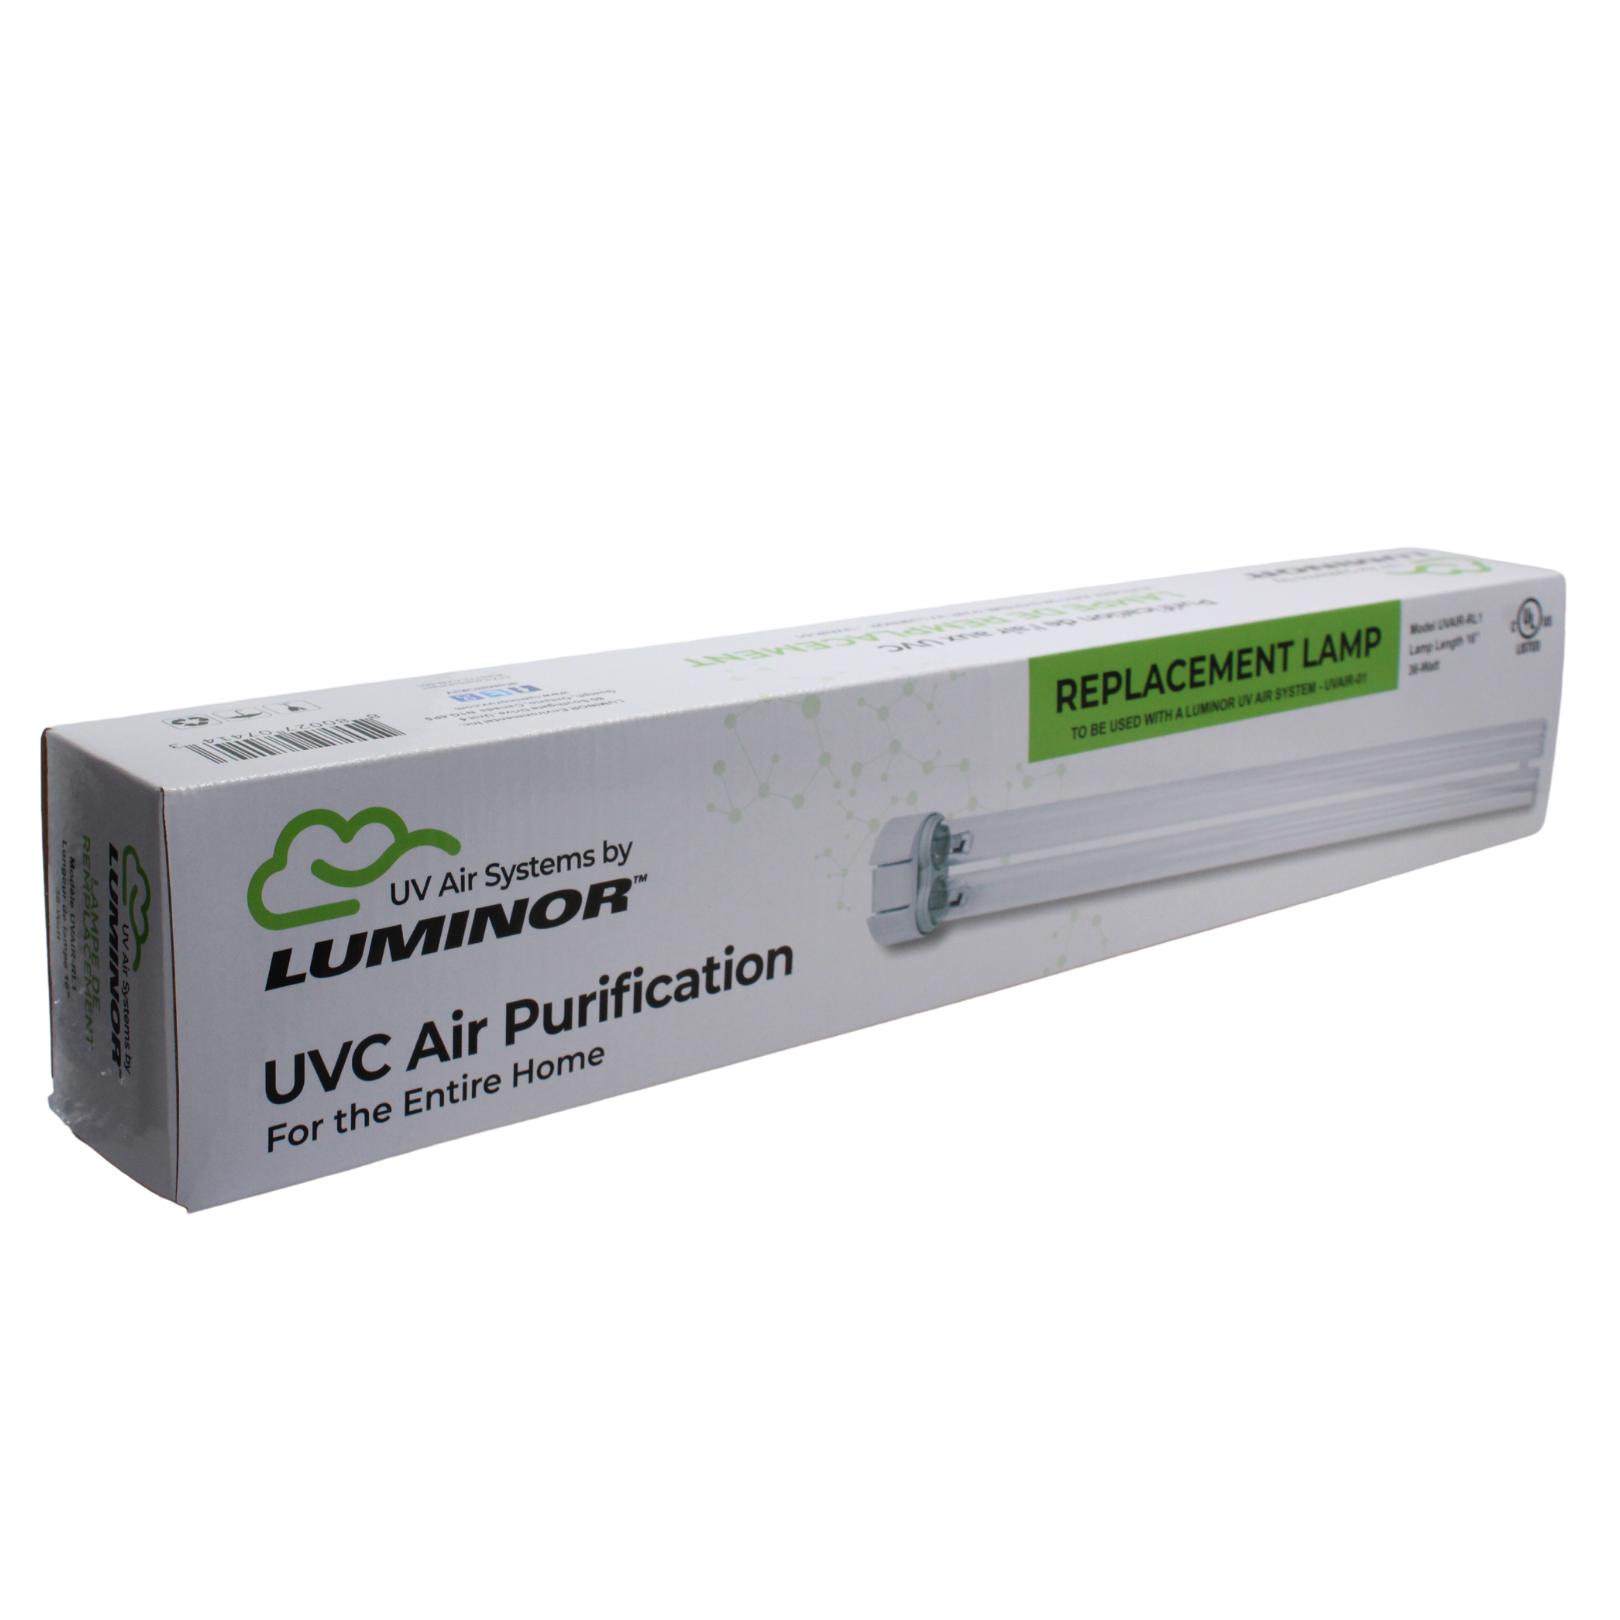 Replacement UV-C Lamp For UV Air Purification